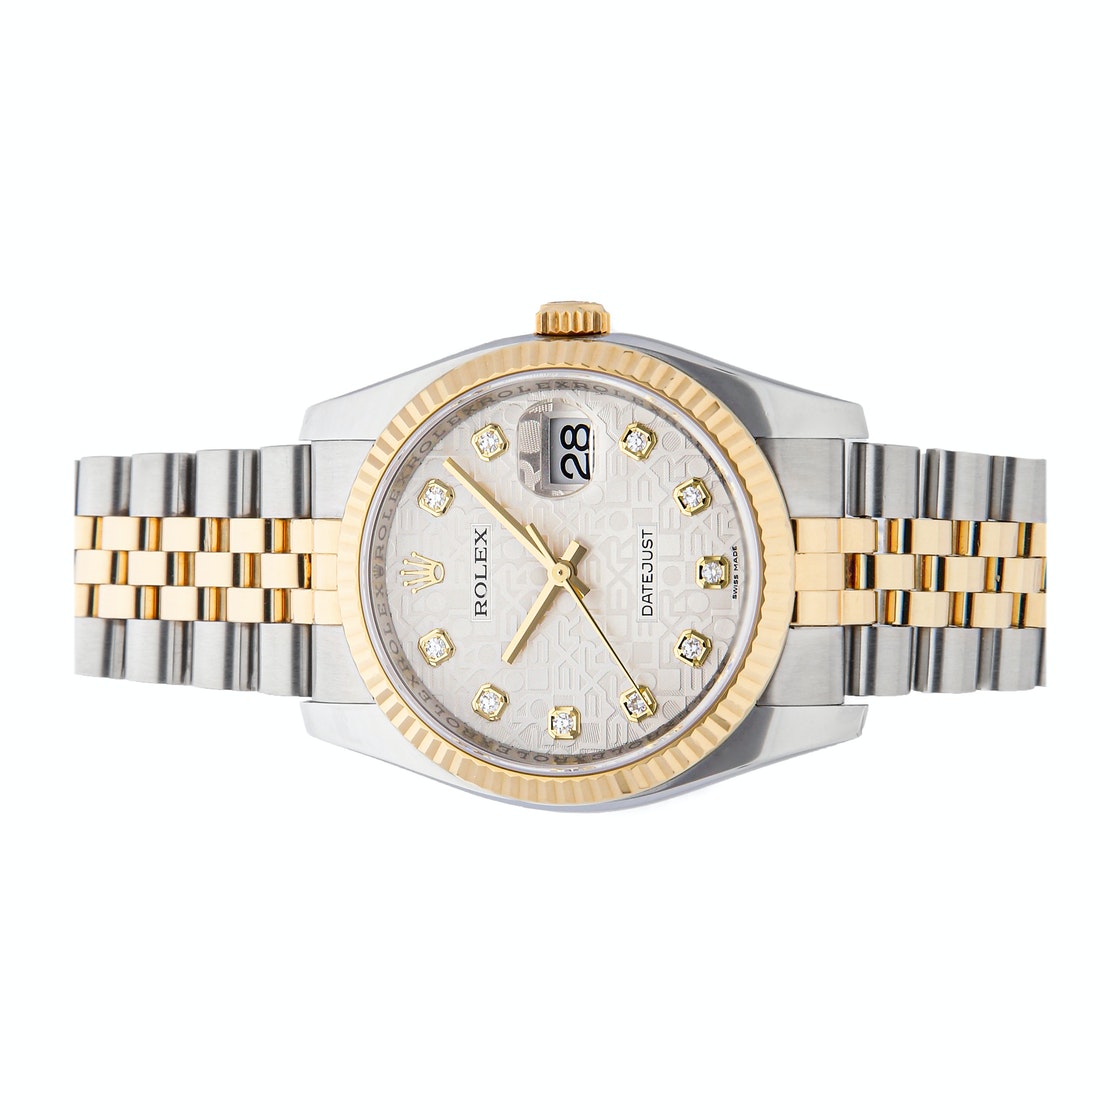 

Rolex Silver Diamonds 18k Yellow Gold And Stainless Steel Datejust 116233 Men's Wristwatch 36 MM